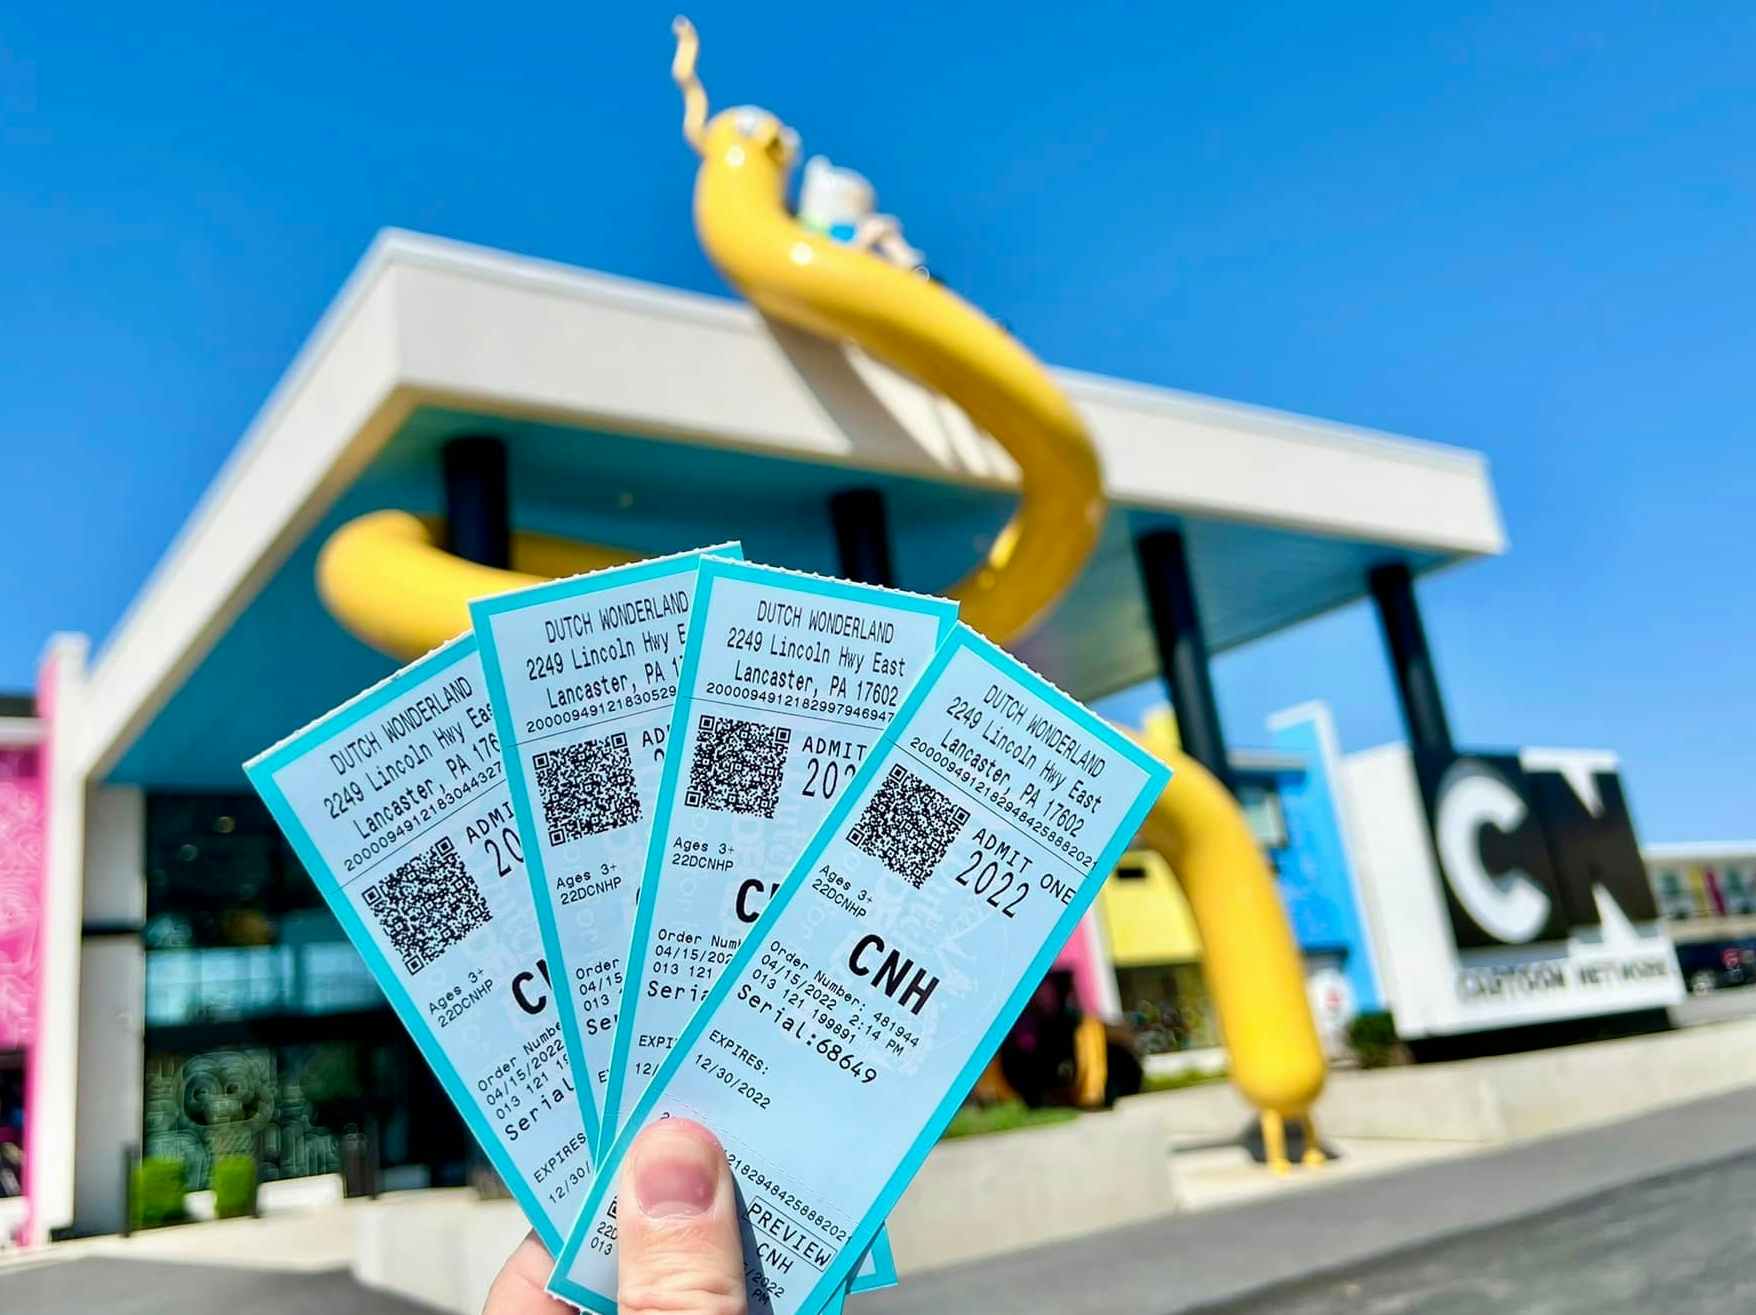 A person holding up Dutch Wonderland tickets in front of the Cartoon Network Hotel in Lancaster Pennsylvania